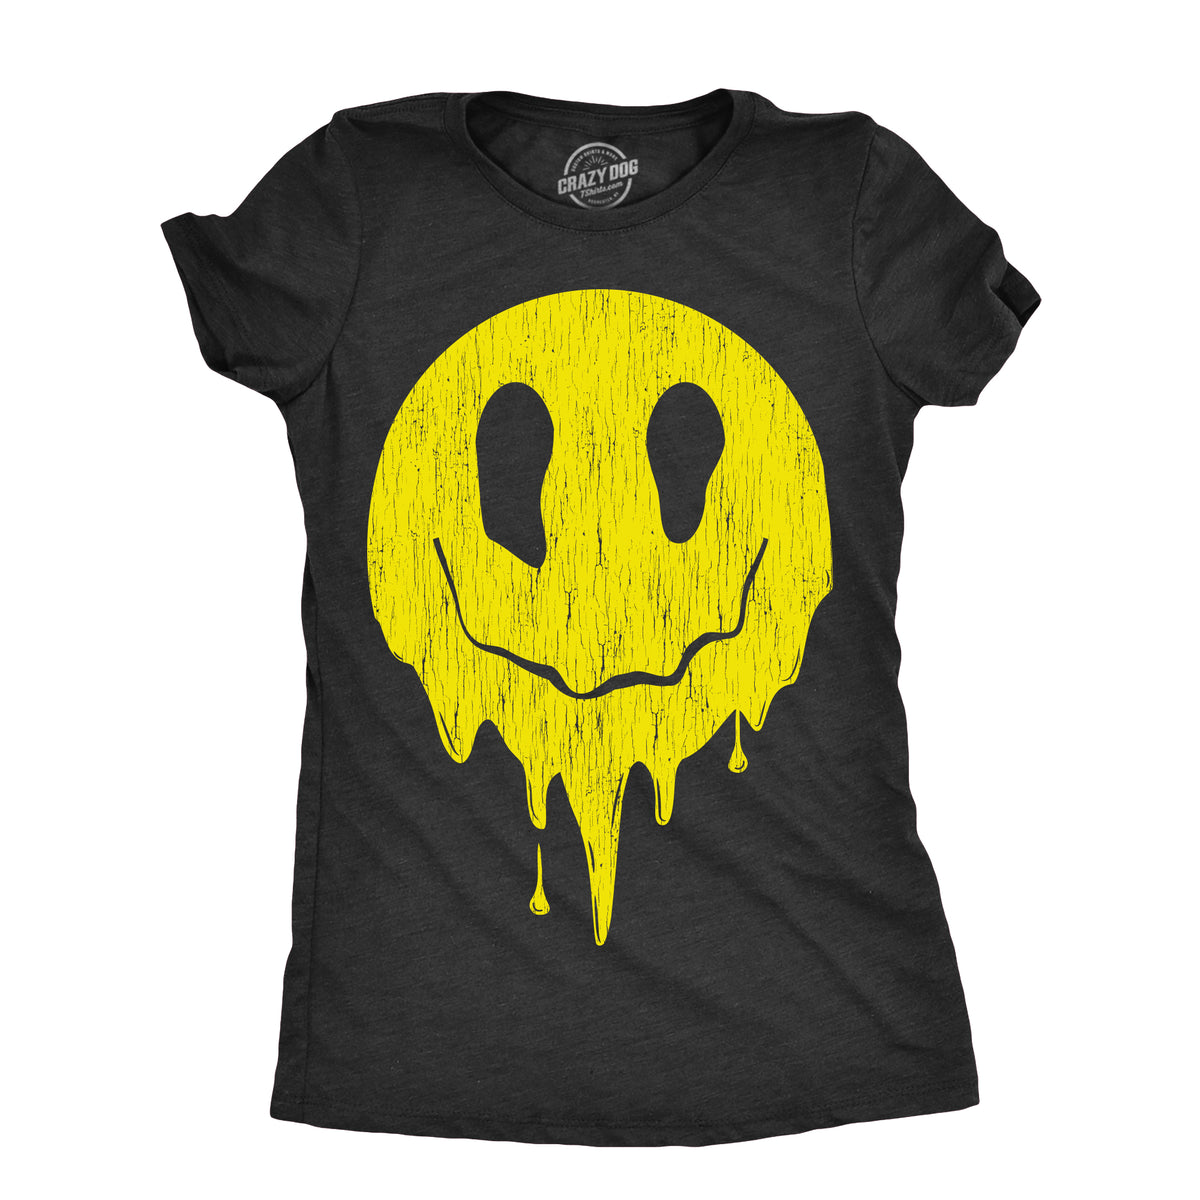 Funny Heather Black - DRIPPINGSMILE Dripping Smile Womens T Shirt Nerdy sarcastic Tee